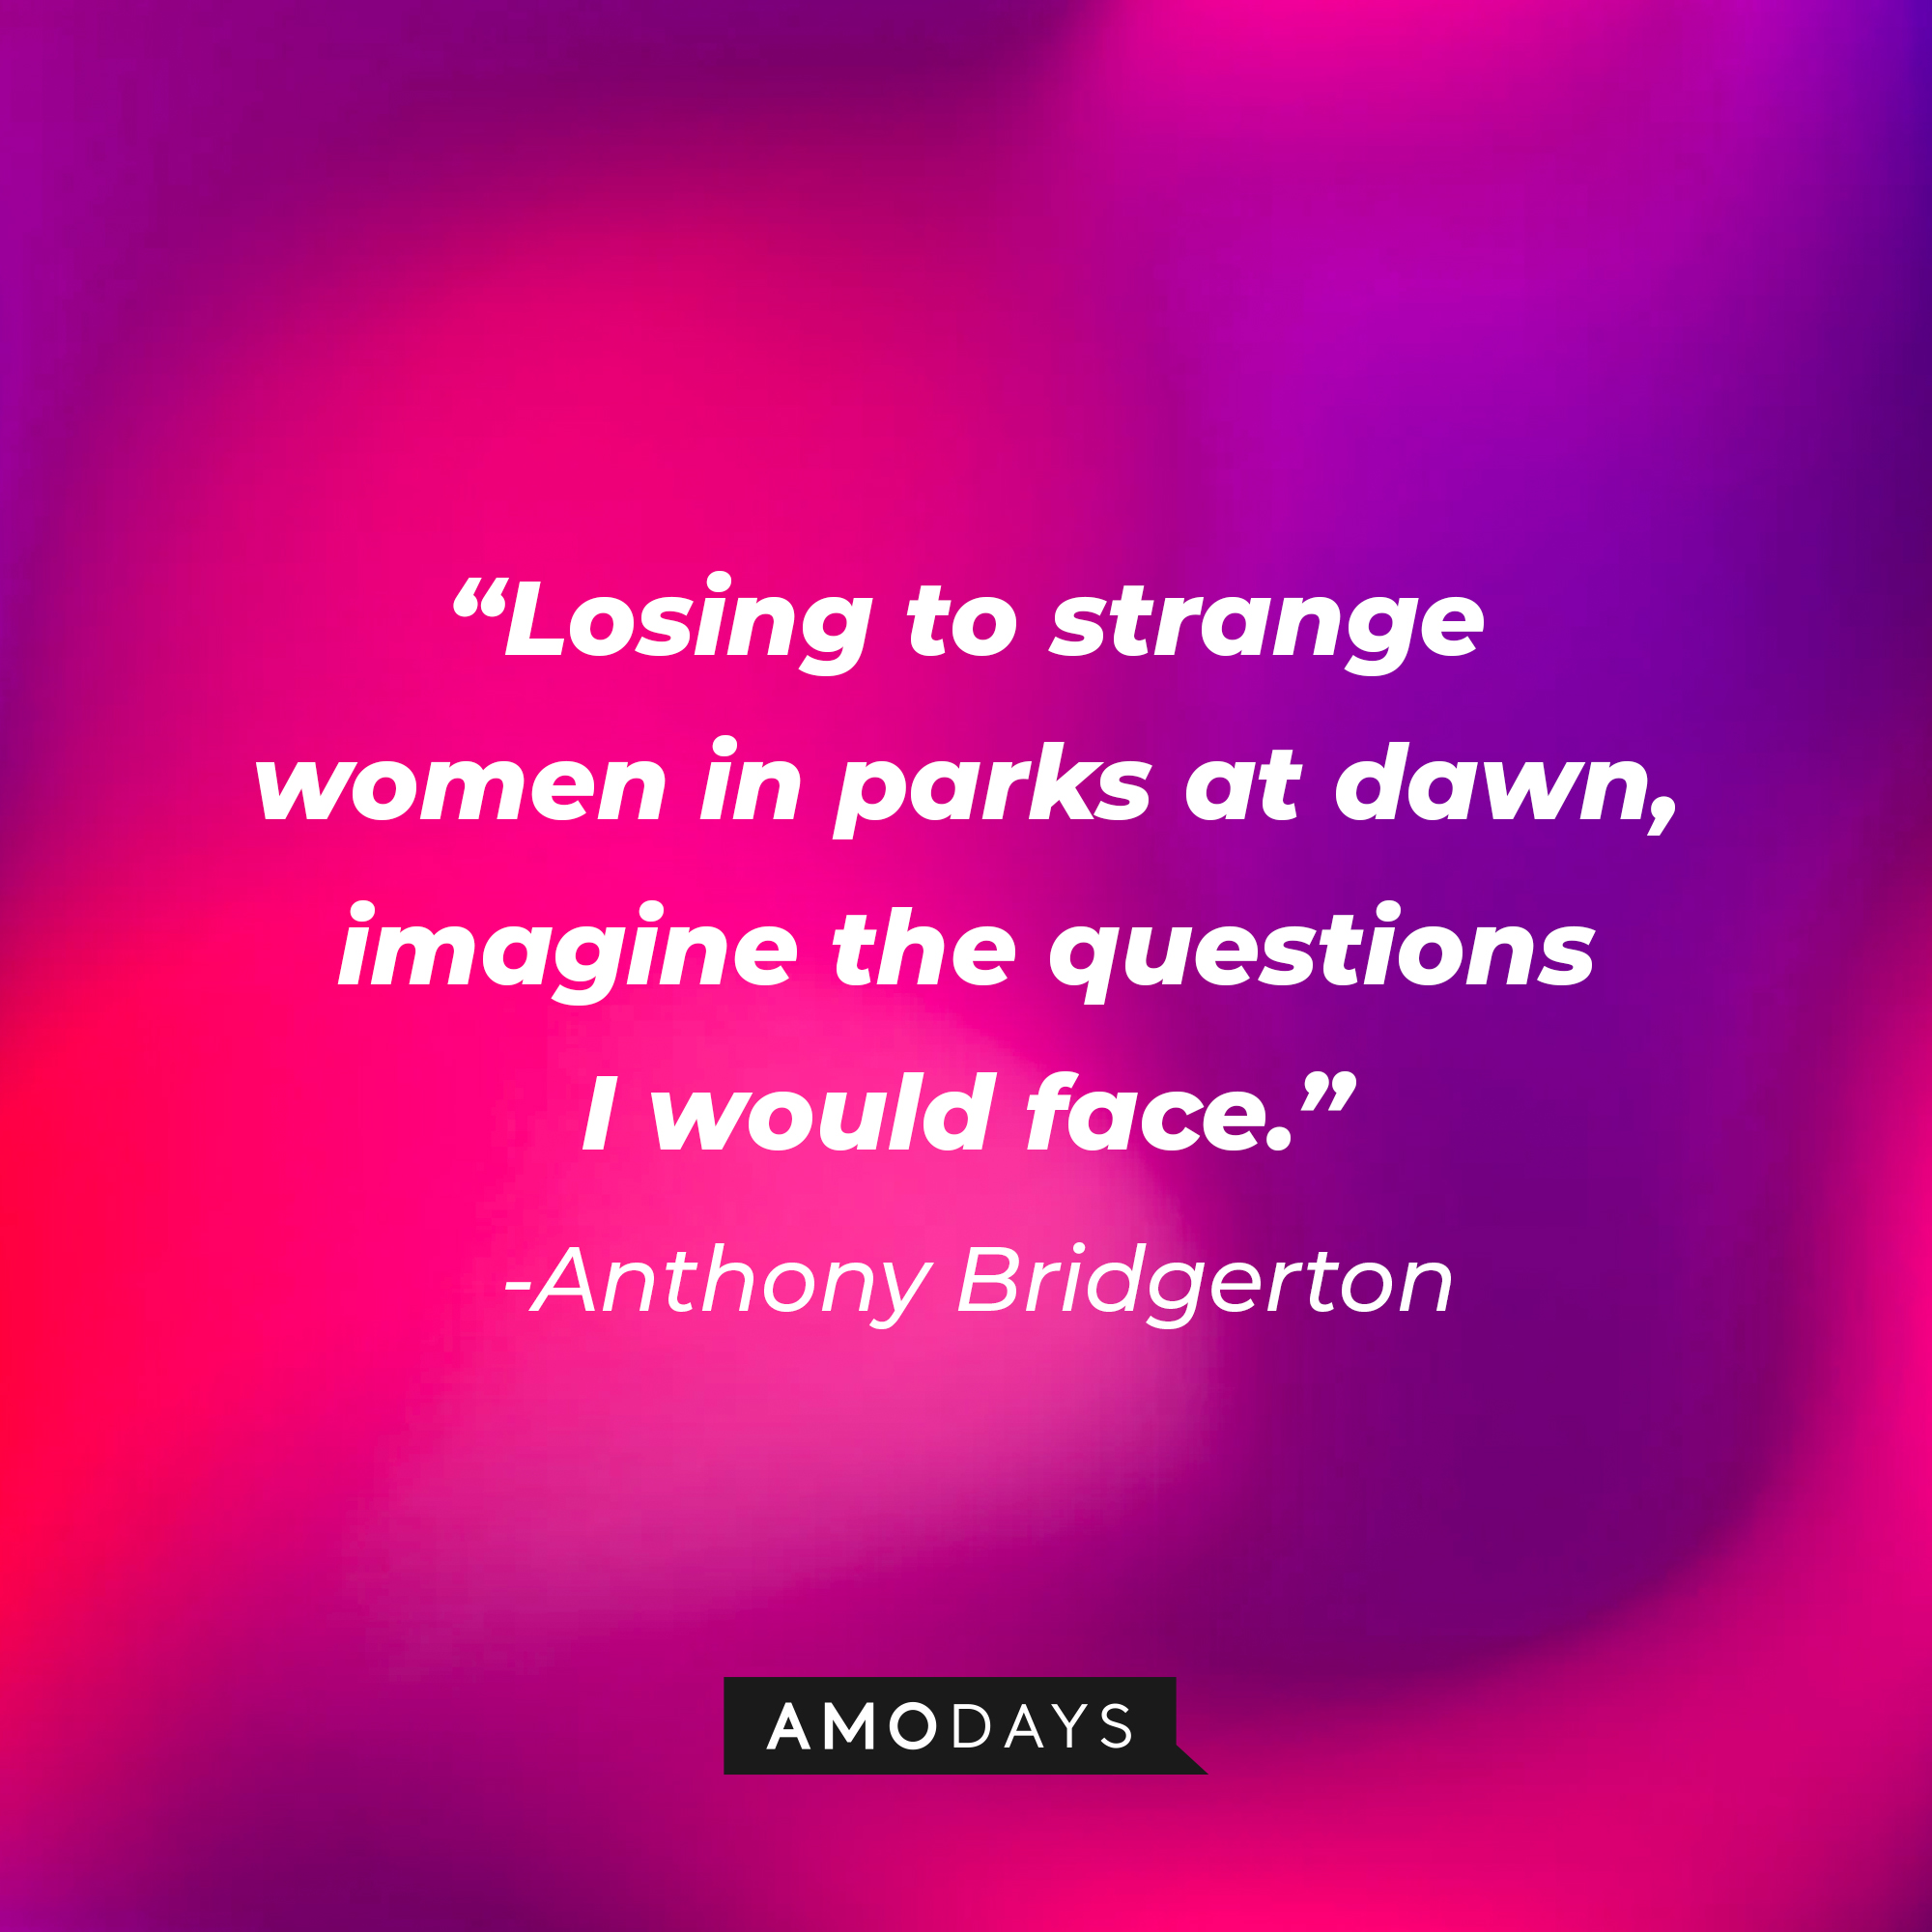 Anthony Bridgerton's quote: "Losing to strange women in parks at dawn, imagine the questions I would face." | Source: AmoDays